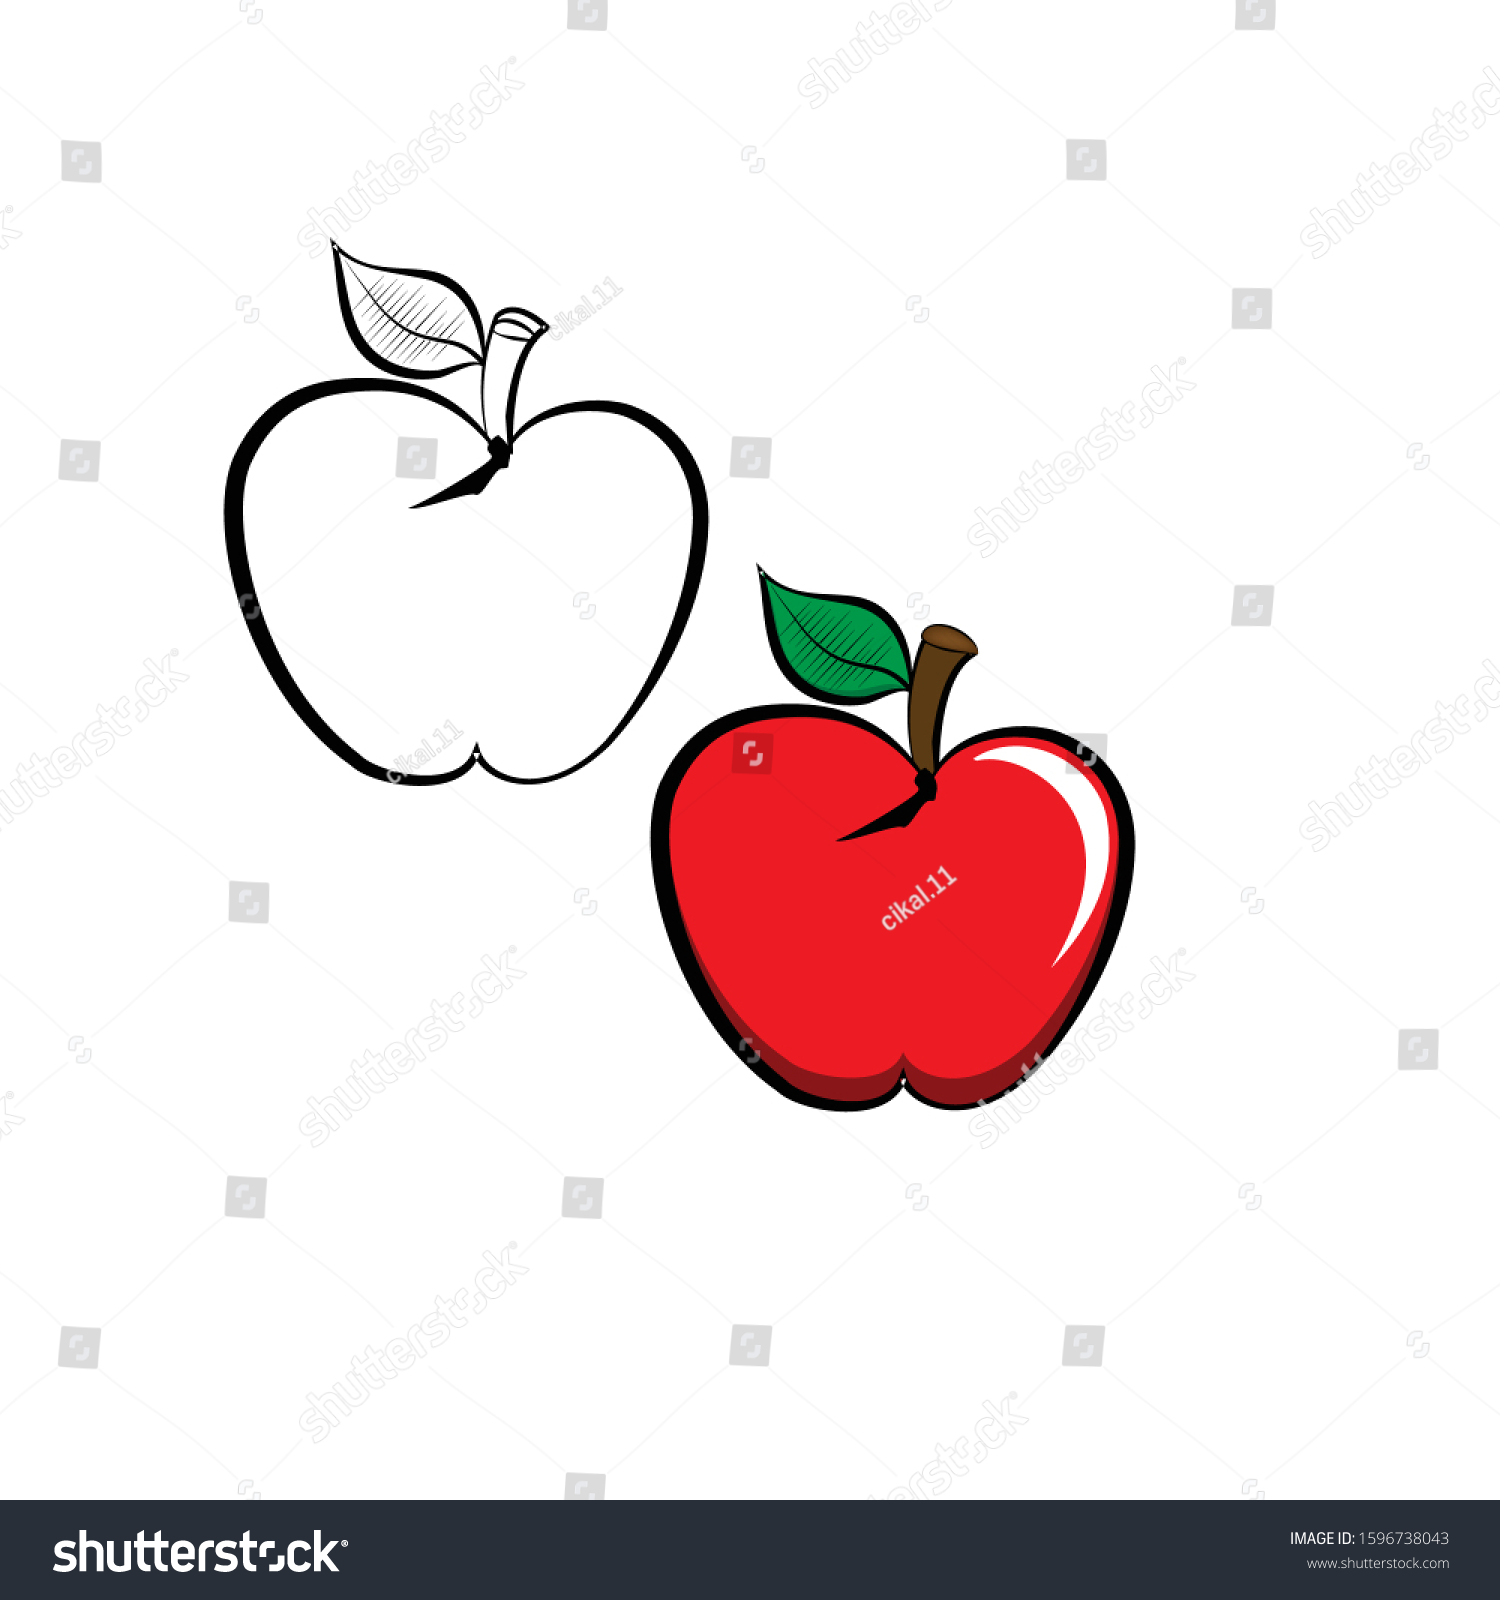 Download Cute Cartoon Apple Fruit Slices Coloring Stock Vector Royalty Free 1596738043